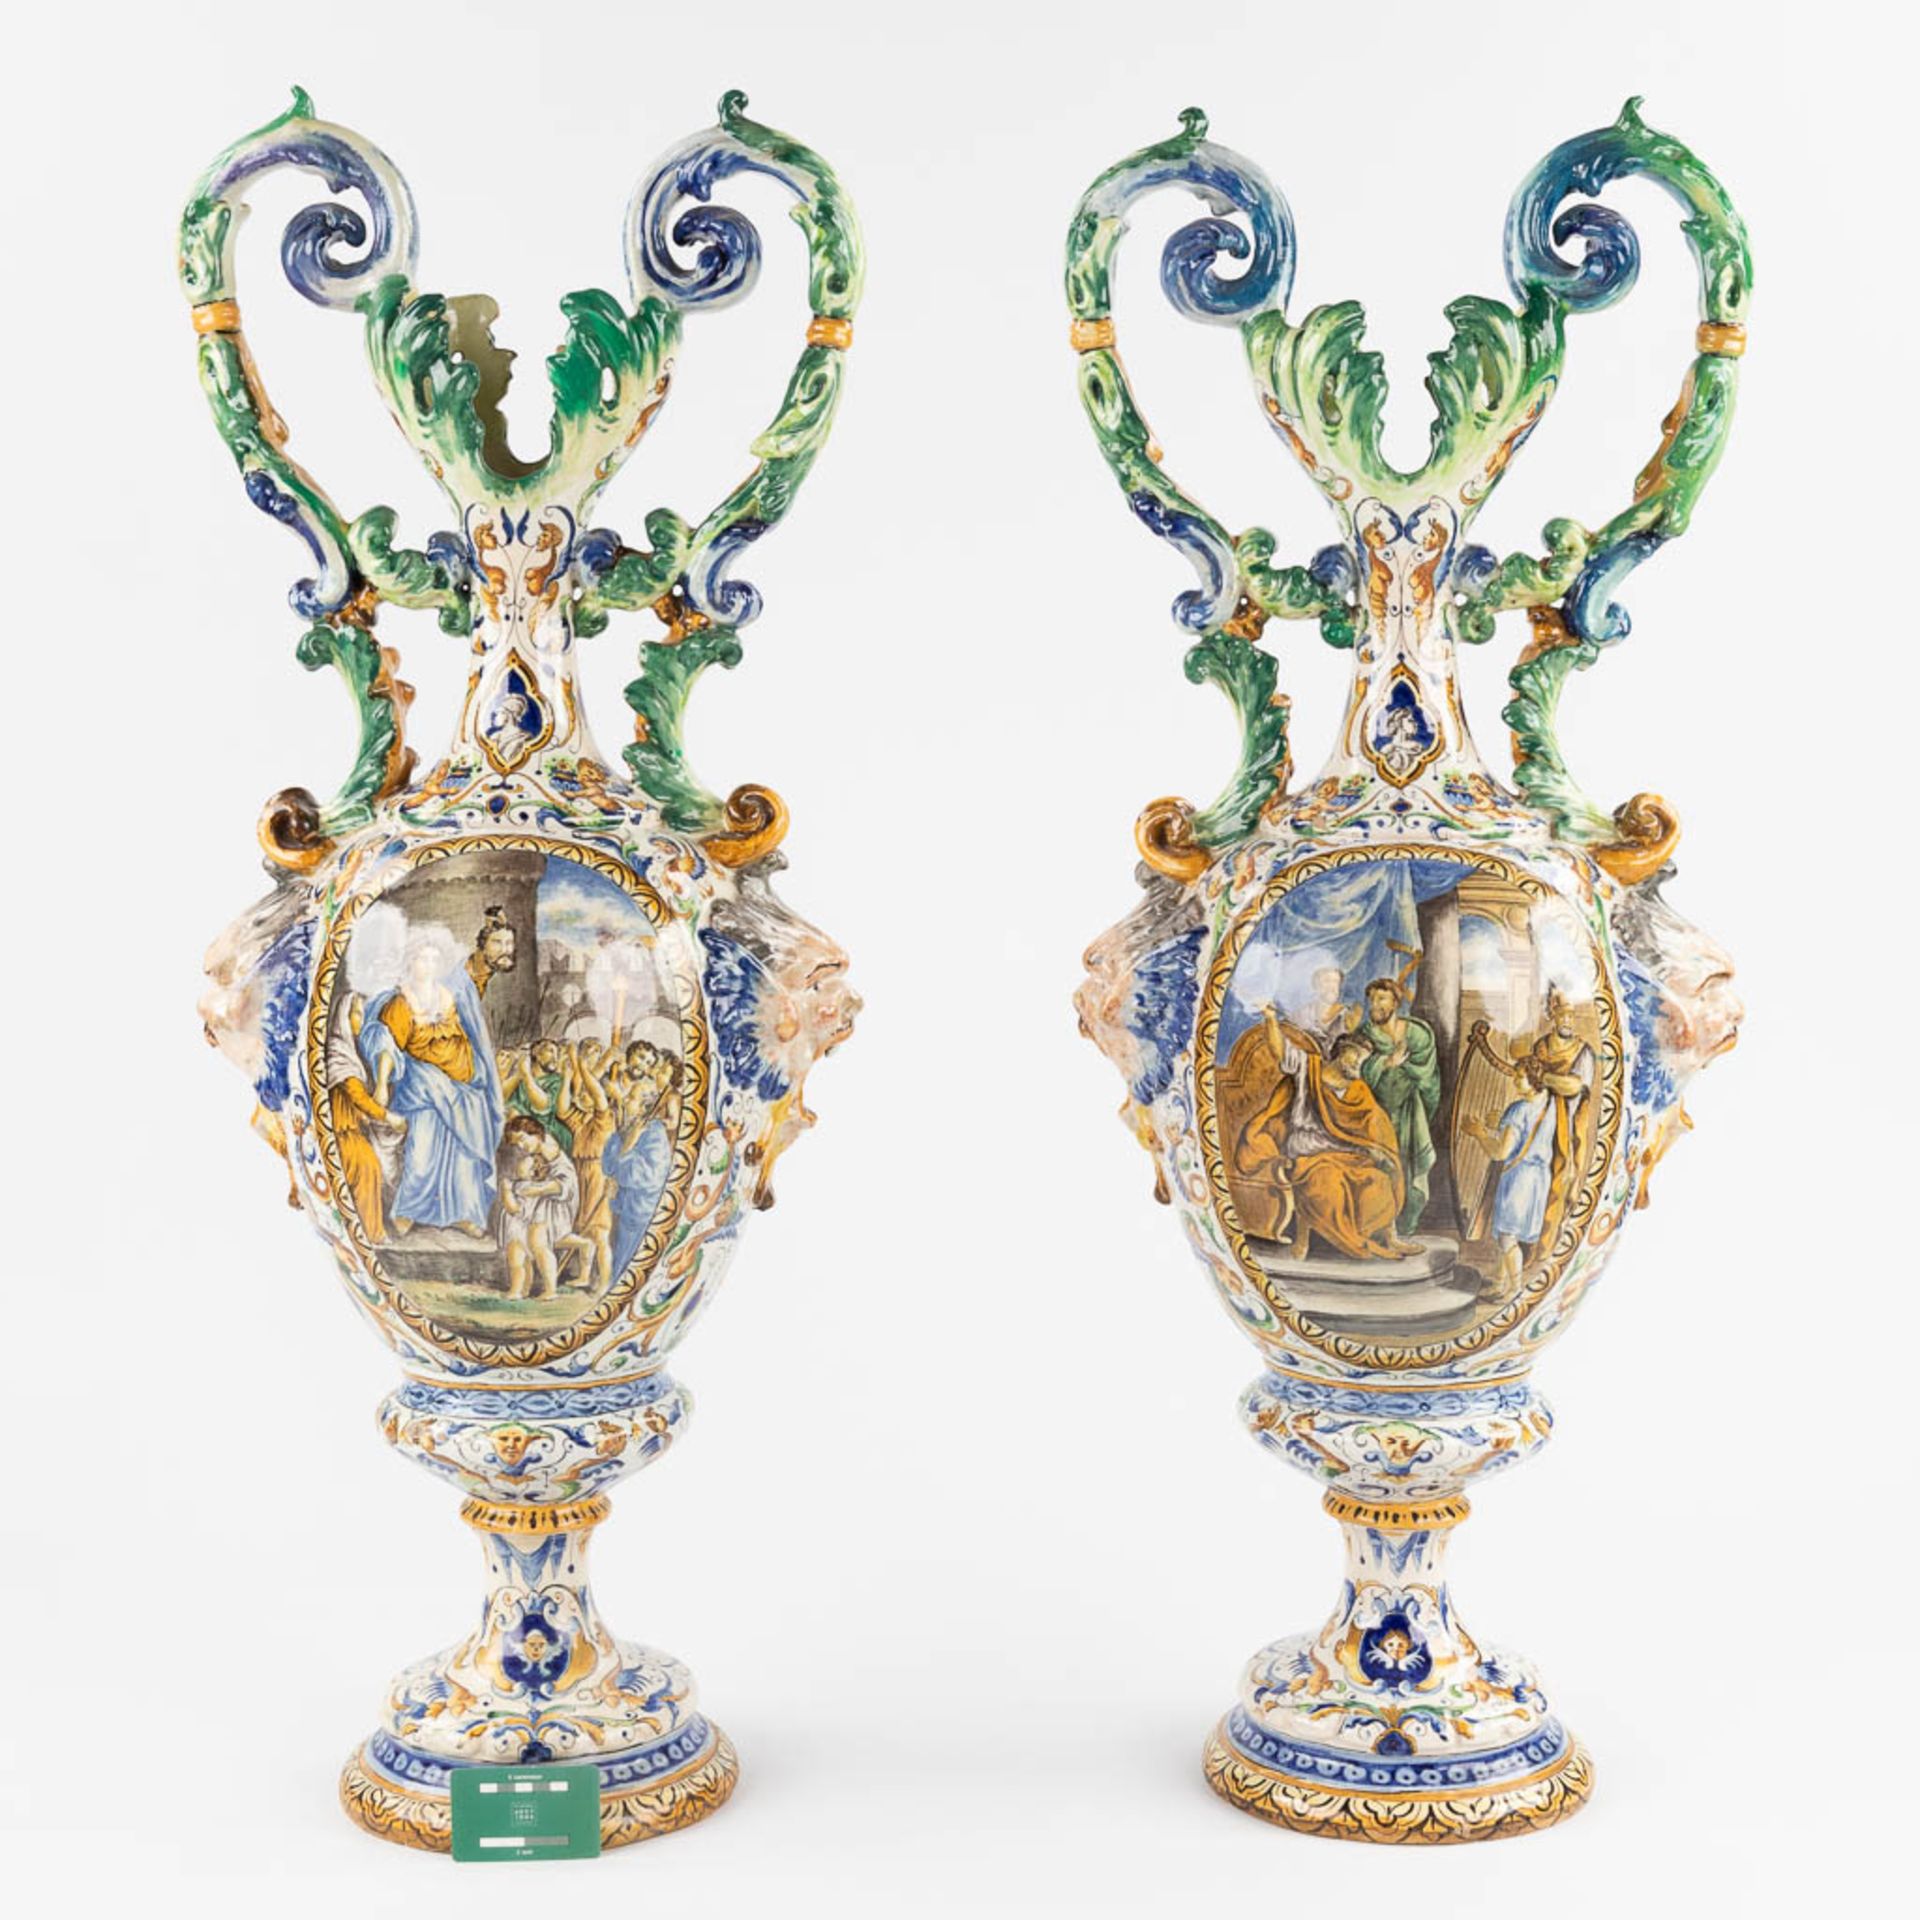 A pair of large vases, Italian Renaissance style, glazed faience. 20th C. (D:45 x W:45 x H:205 cm) - Image 2 of 31